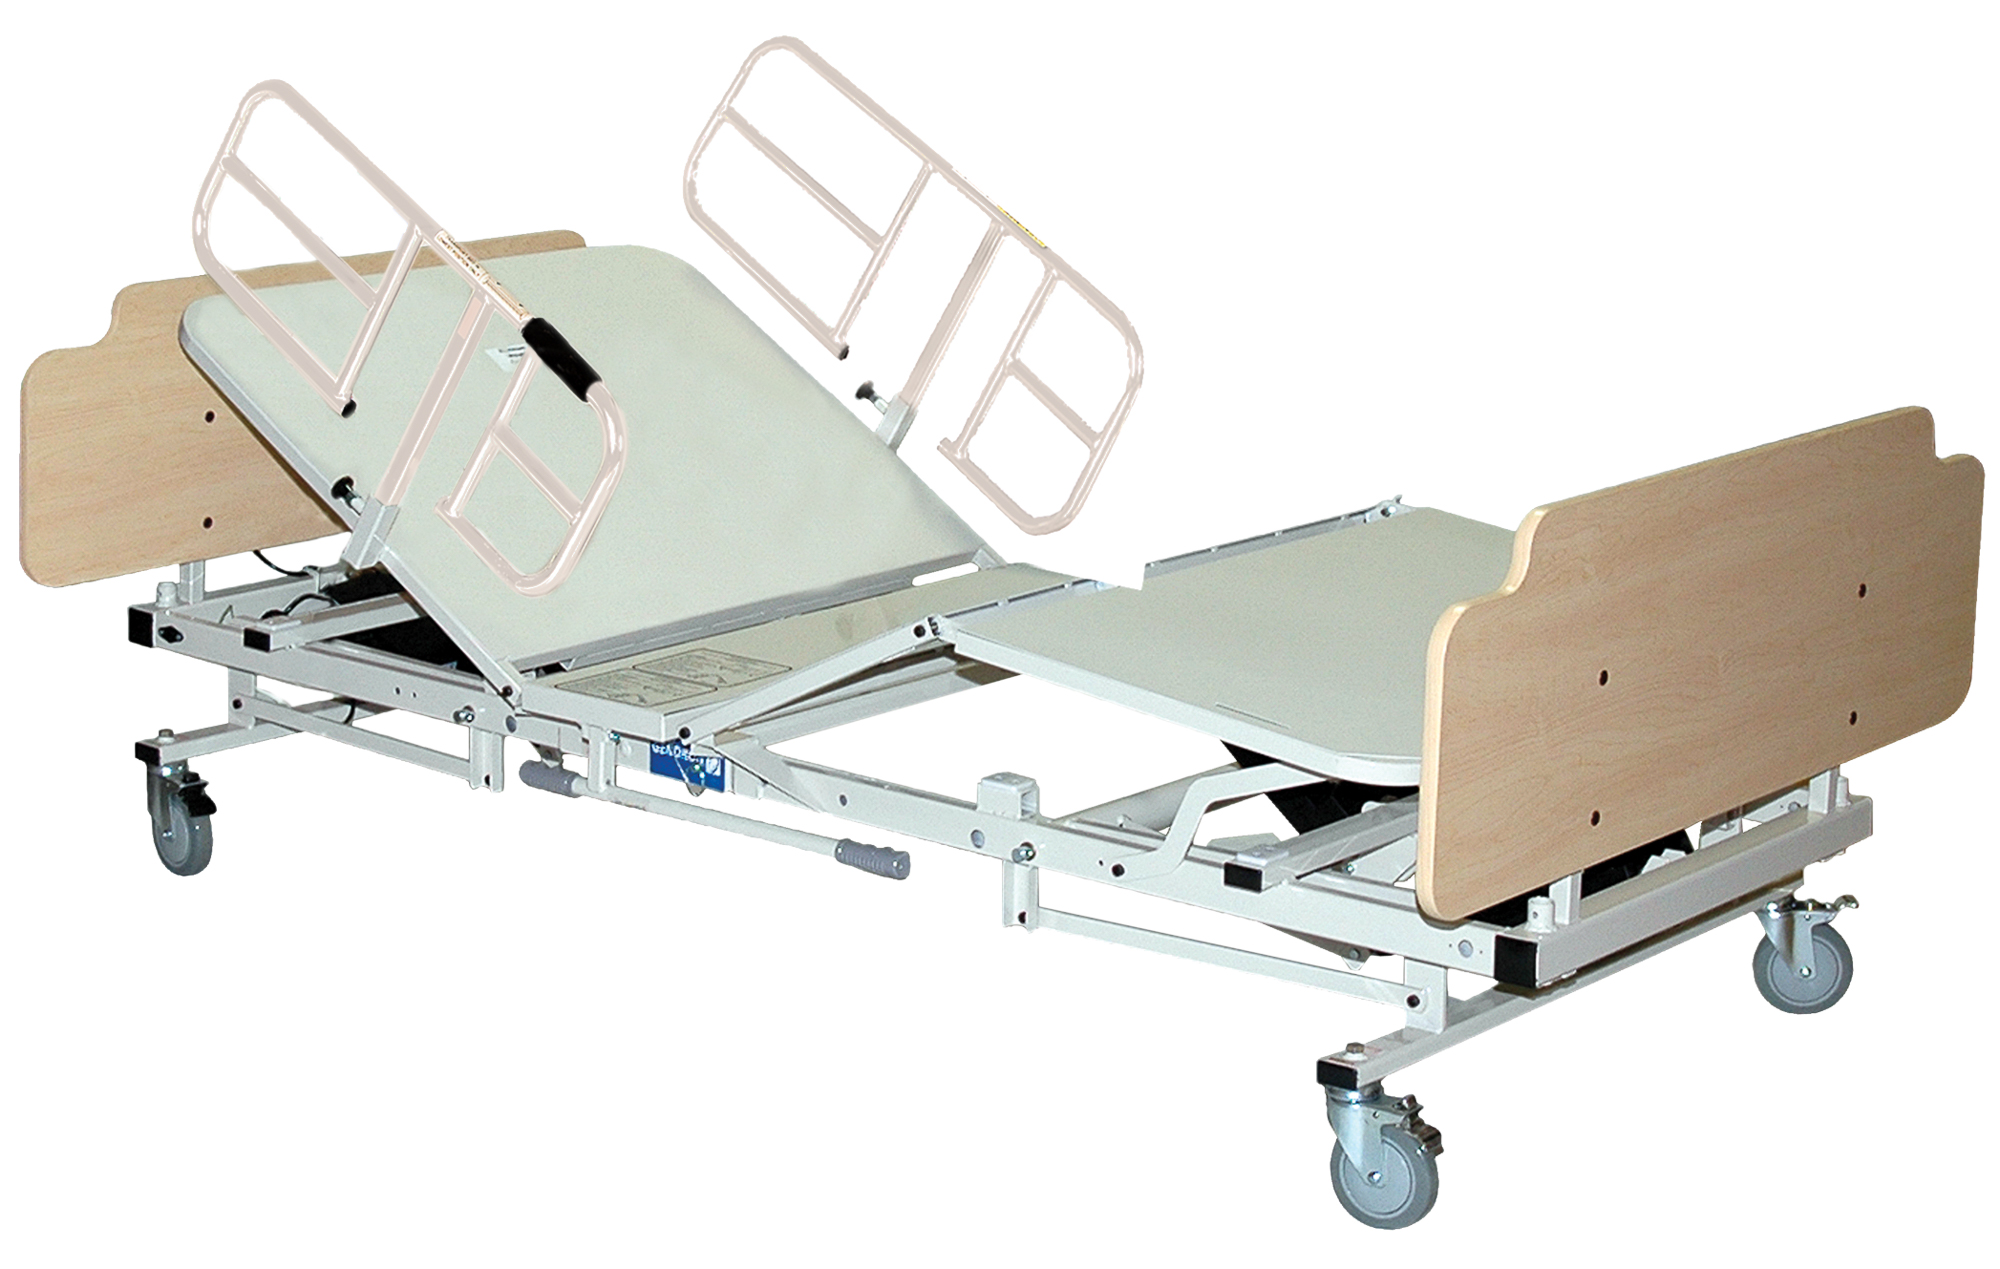 Bariatric Home Care Bed